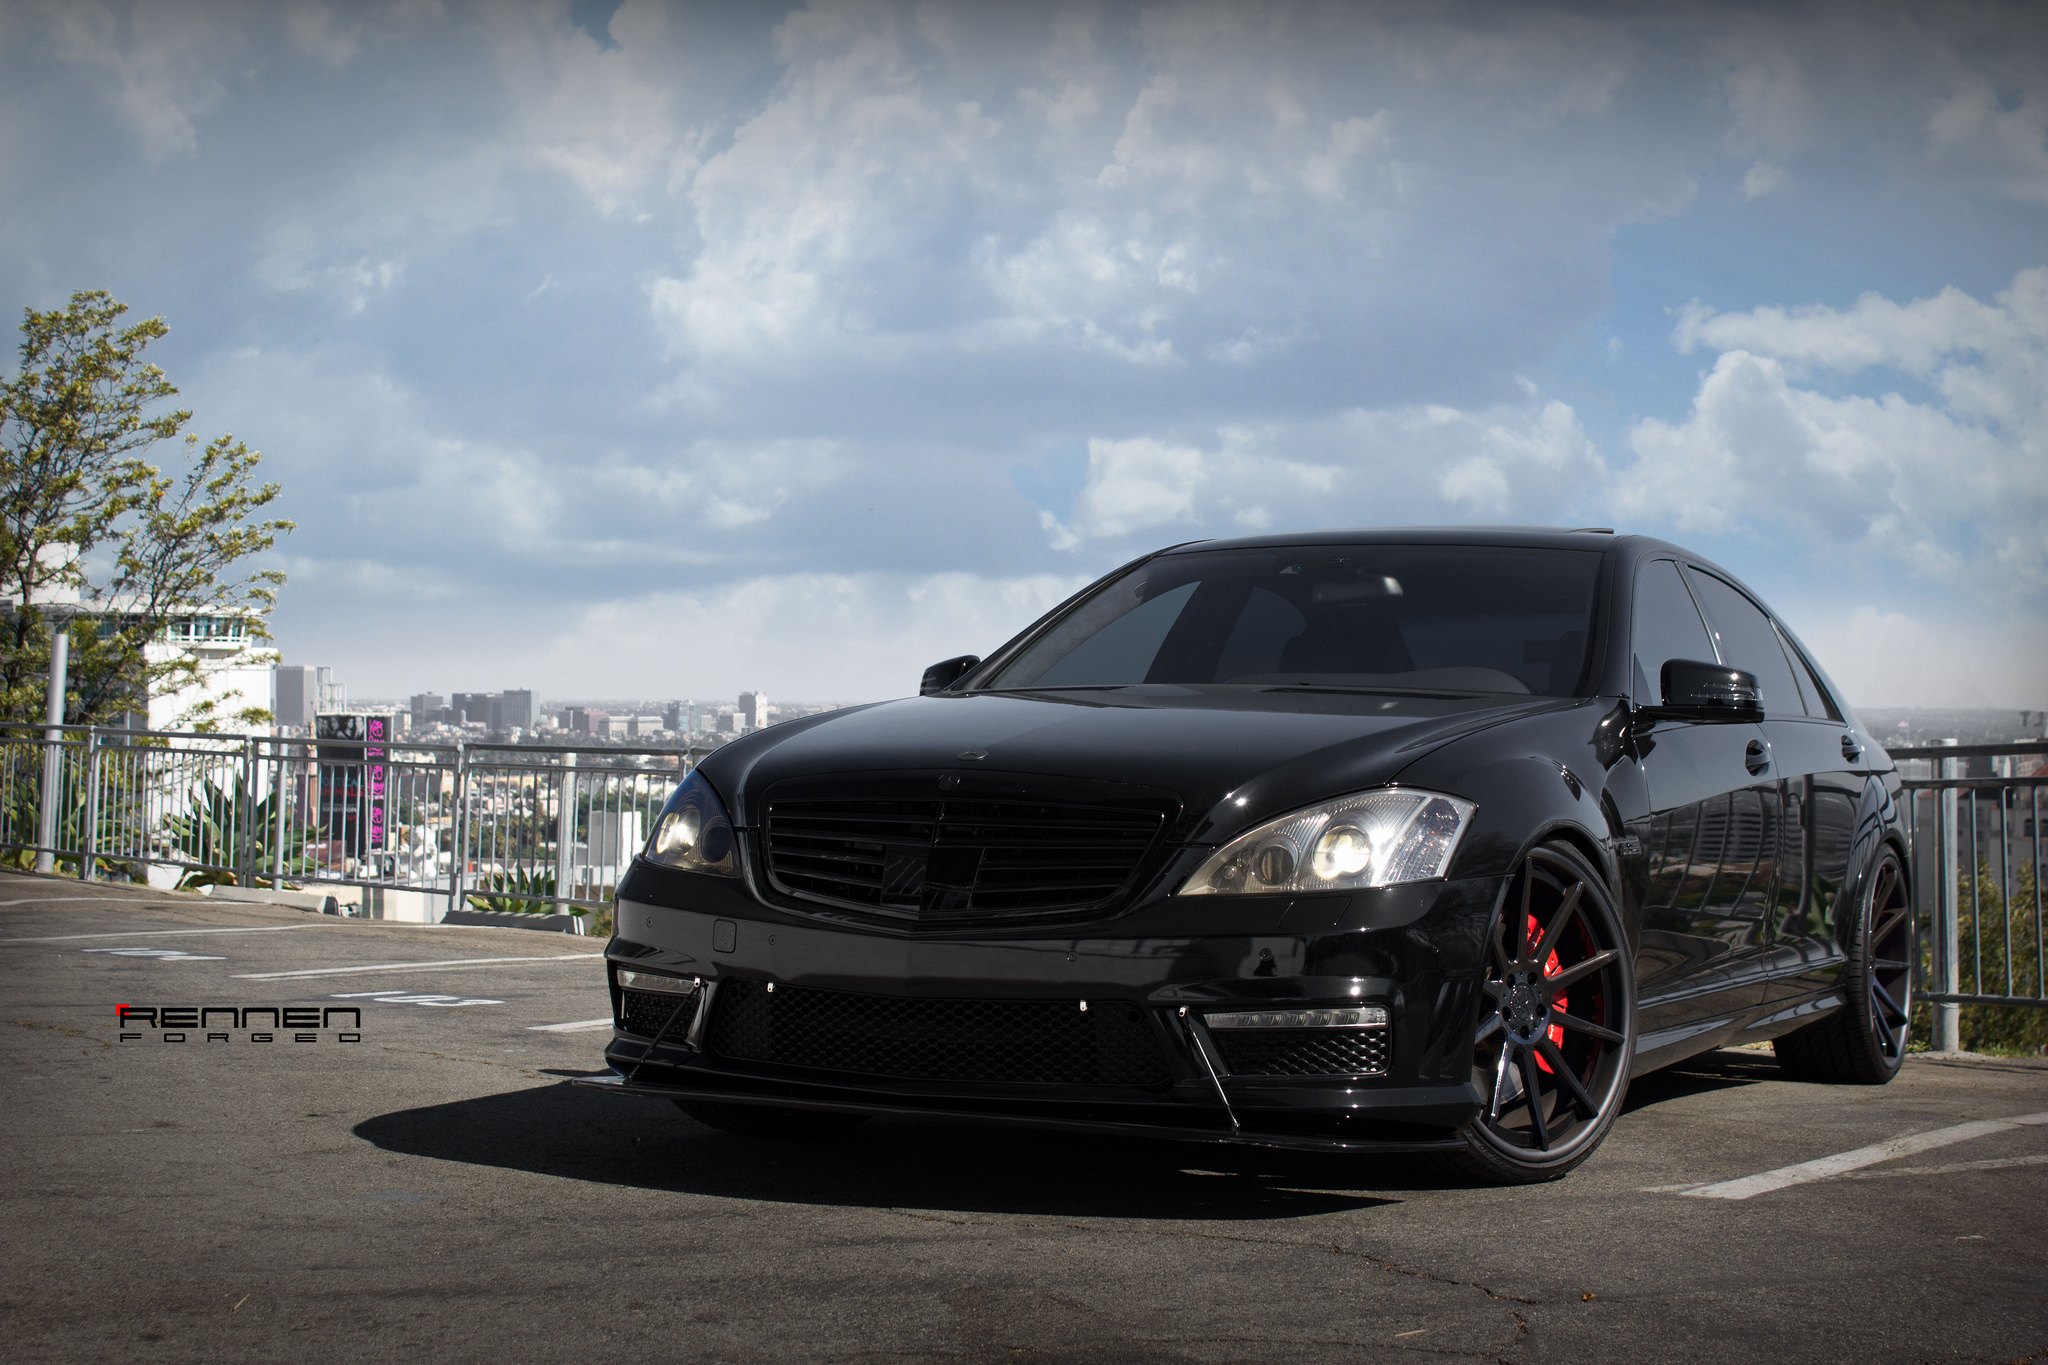 Black Mercedes S Class with Crystal Clear Headlights - Photo by Rennen International